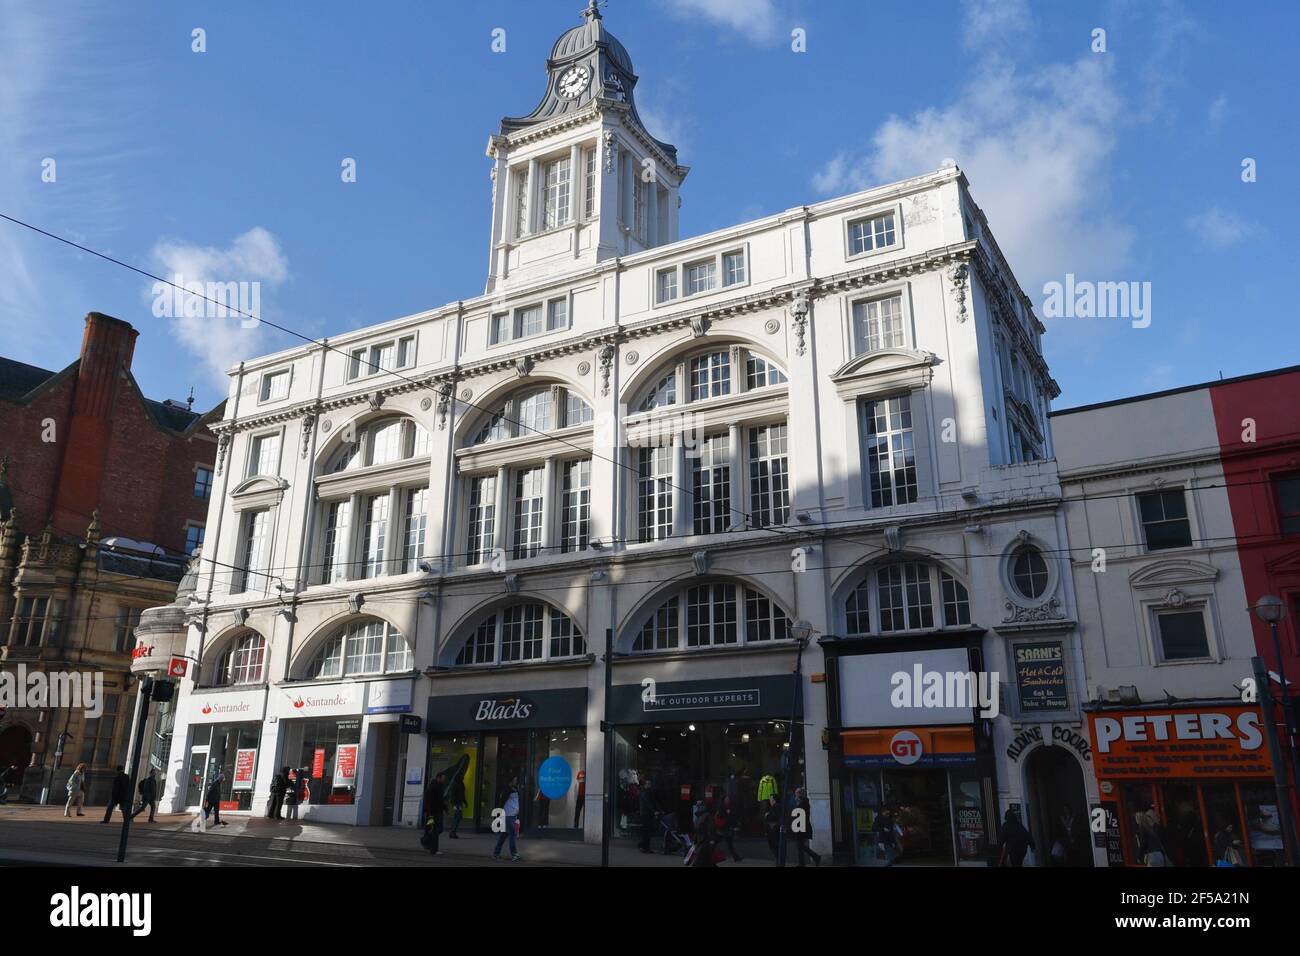 The frontage of the former Star and Telegraph building on High Street in Sheffield city centre England, grade II listed building Stock Photo